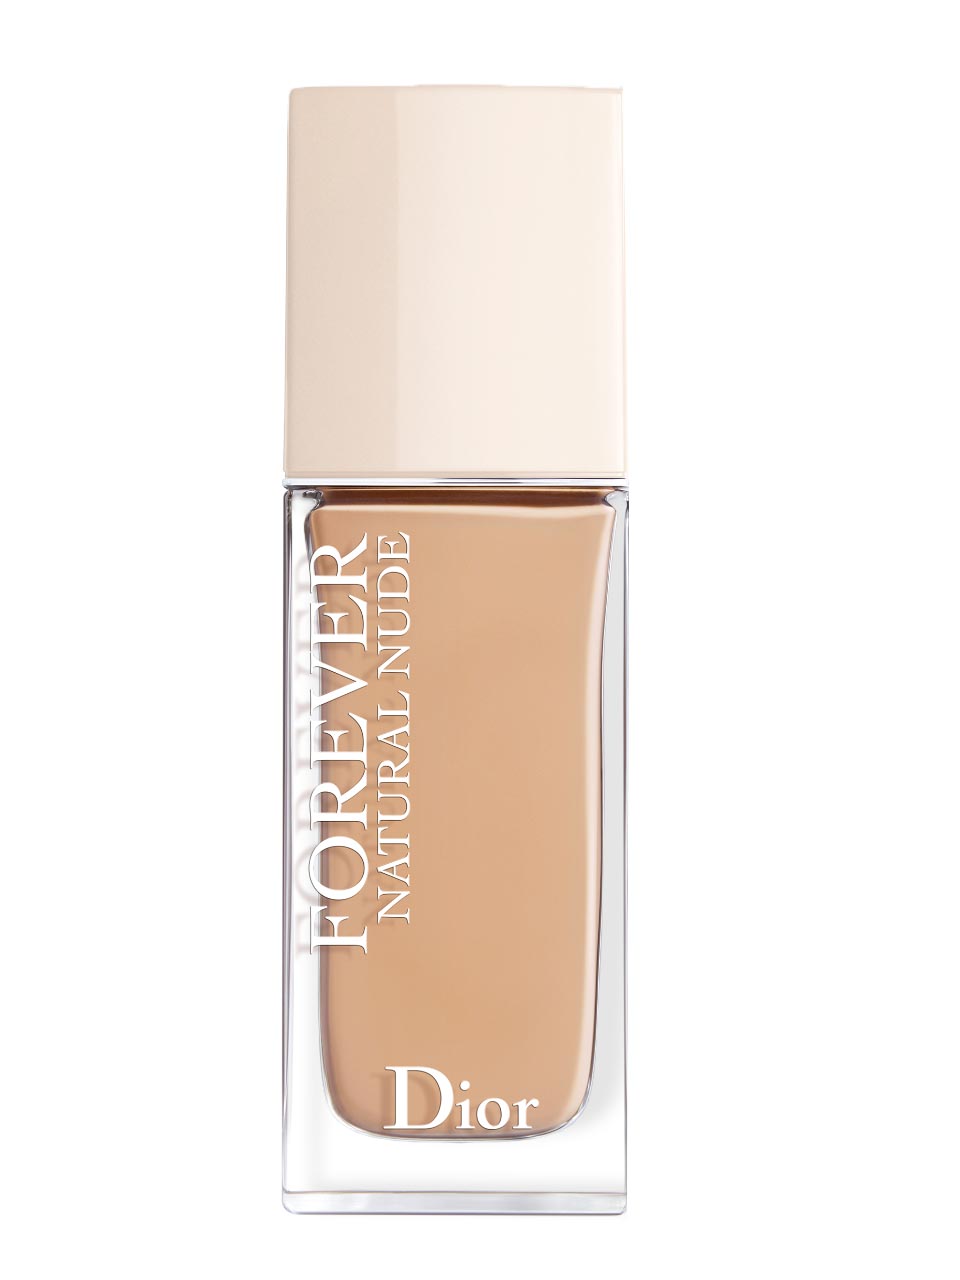 Dior Diorskin Forever Natural Nude Foundation Fluid N° 3N Neutral 30 ml null - onesize - 1